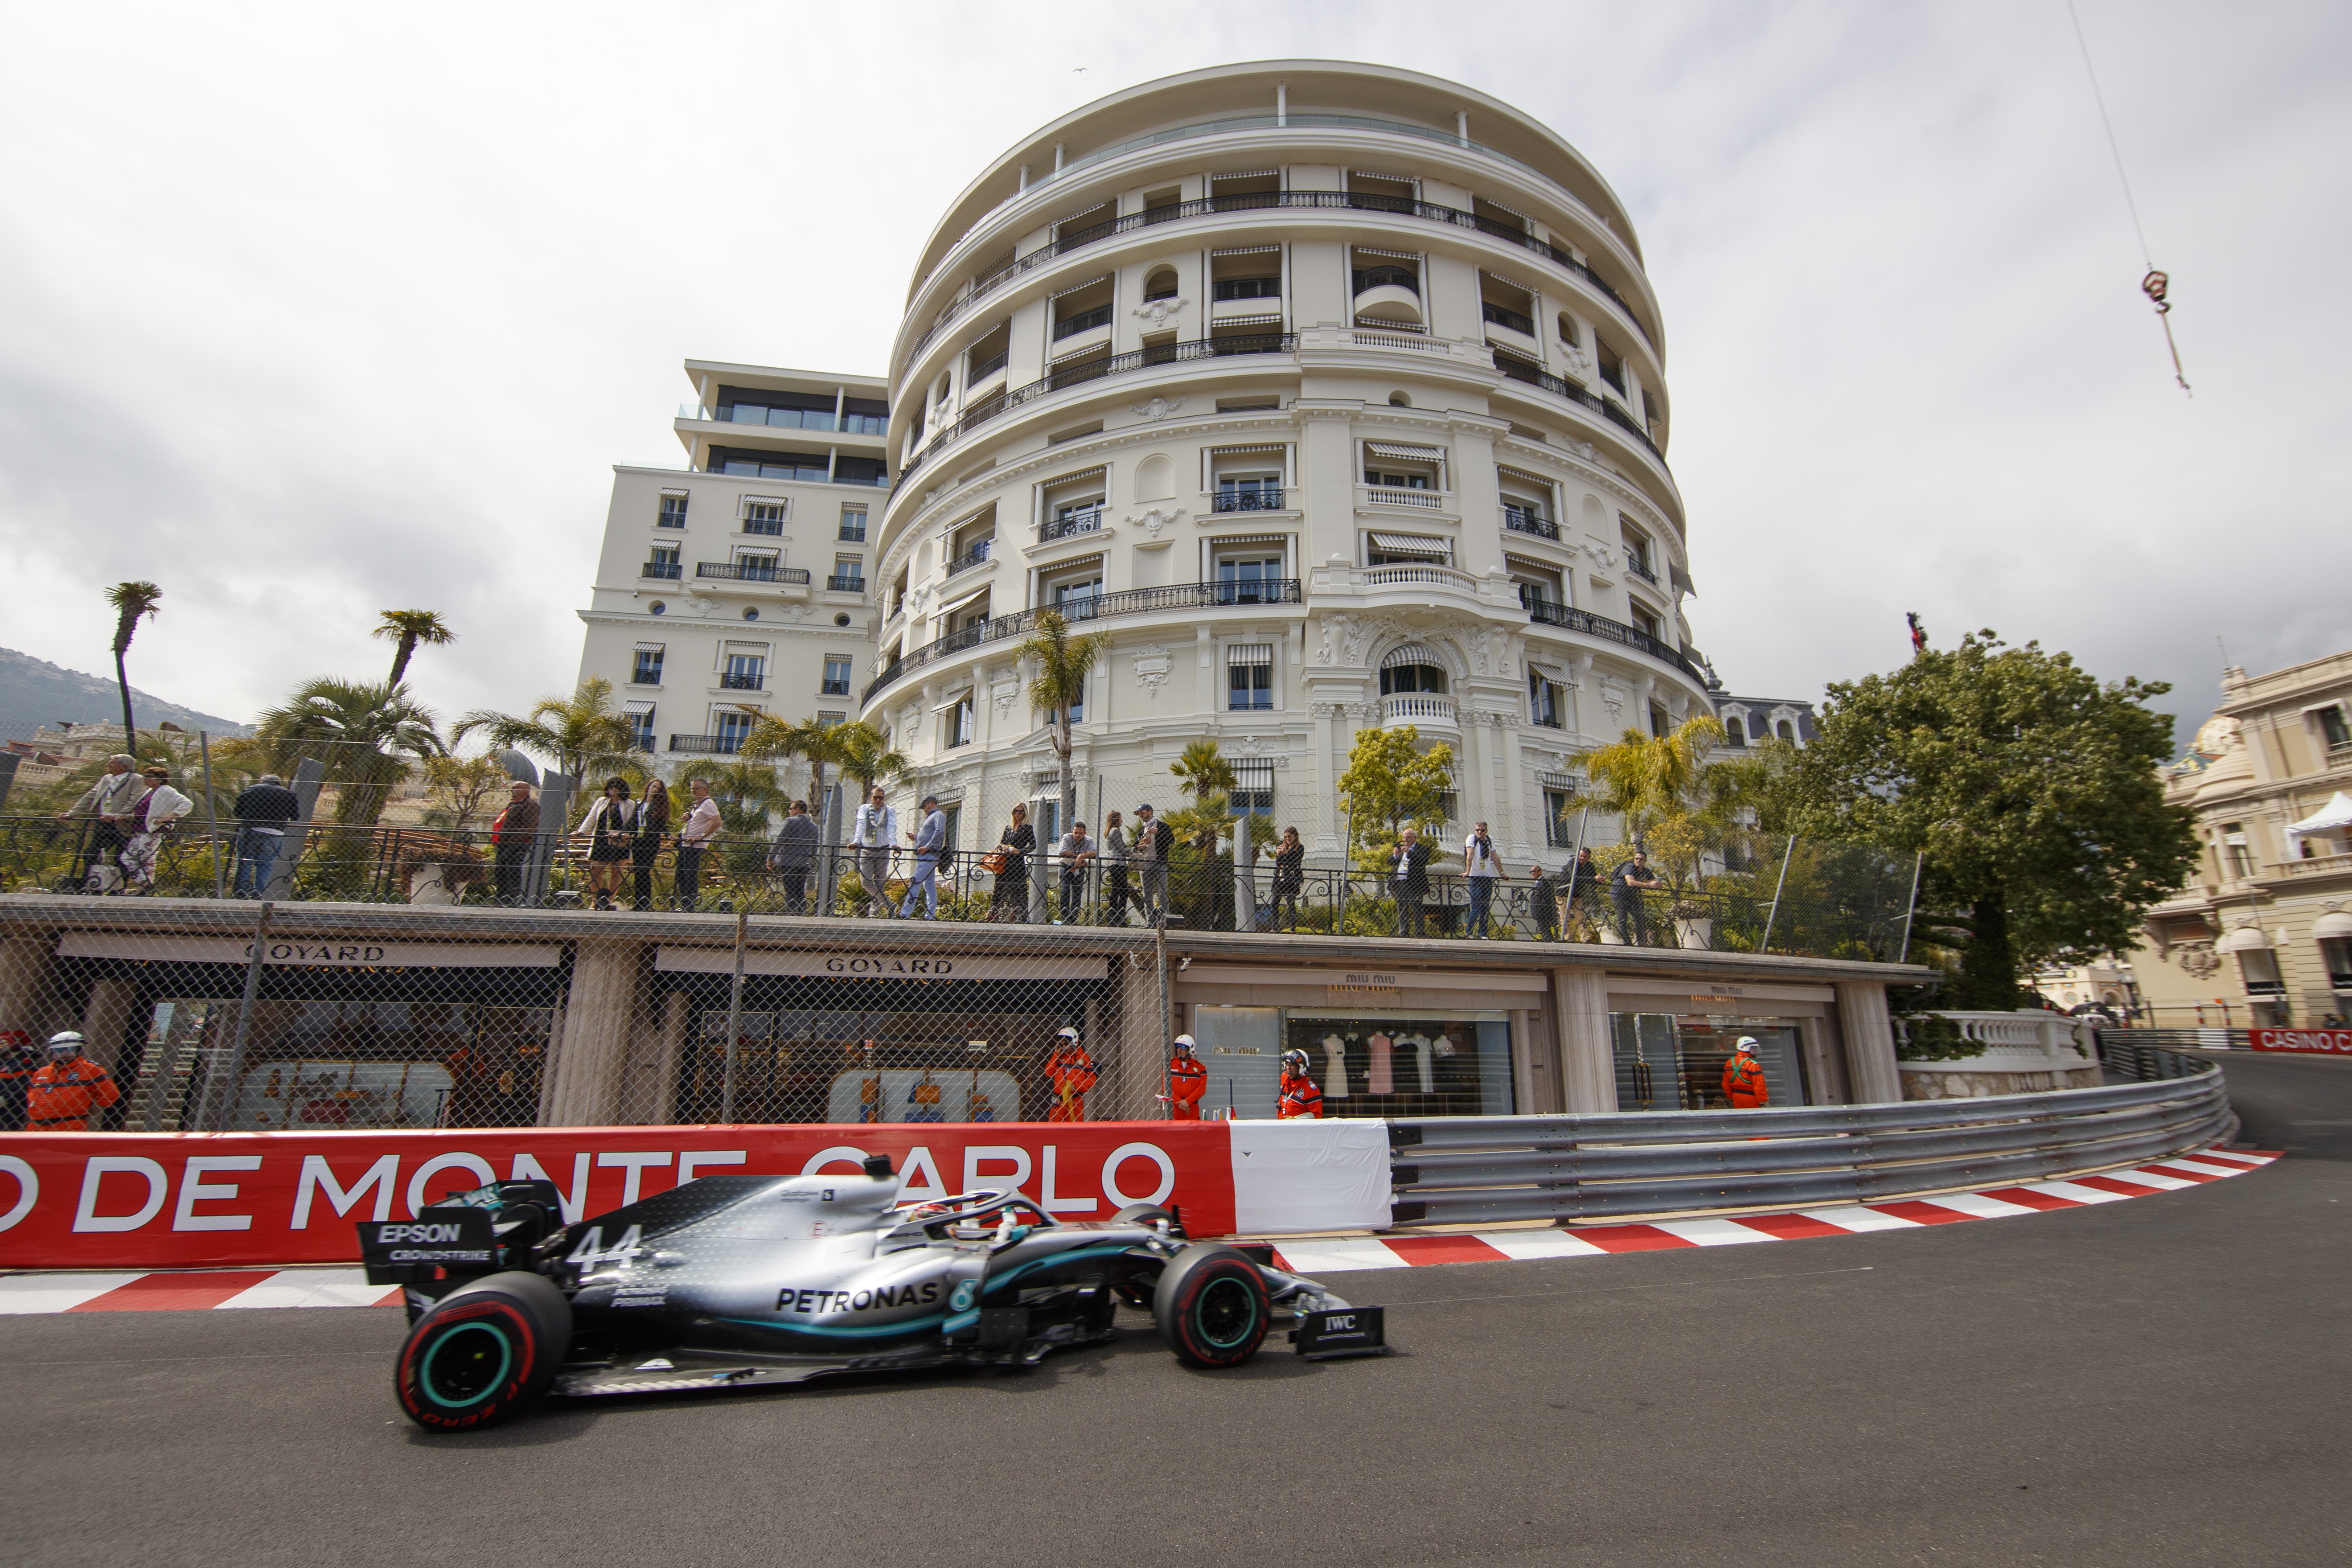 epa07594993 British Formula One driver Lewis Hamilton of Mercedes AMG GP in action during the second practice session of the Formula One Grand Prix of Monaco at the Monte Carlo circuit in Monaco, 23 May 2019. The 2019 Formula One Grand Prix of Monaco will take place on 26 May 2019.  EPA/VALDRIN XHEMAJ